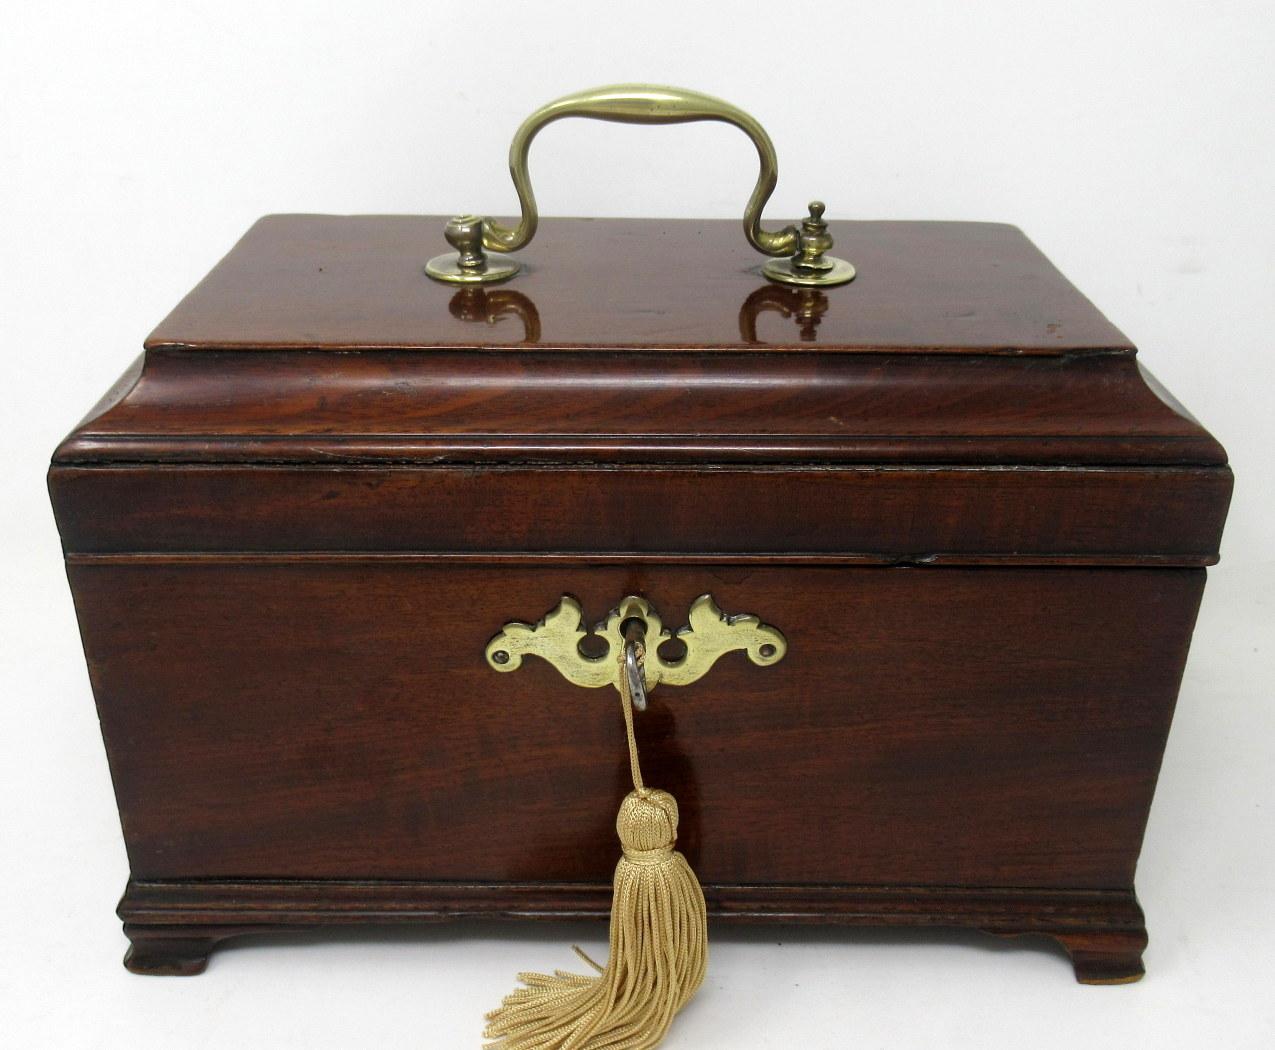 A superb early example of an English Georgian Period Well figured flame mahogany double interior section tea caddy of rectangular outline, compact proportions and outstanding quality, late eighteenth, early nineteenth century. 

The hinged lid